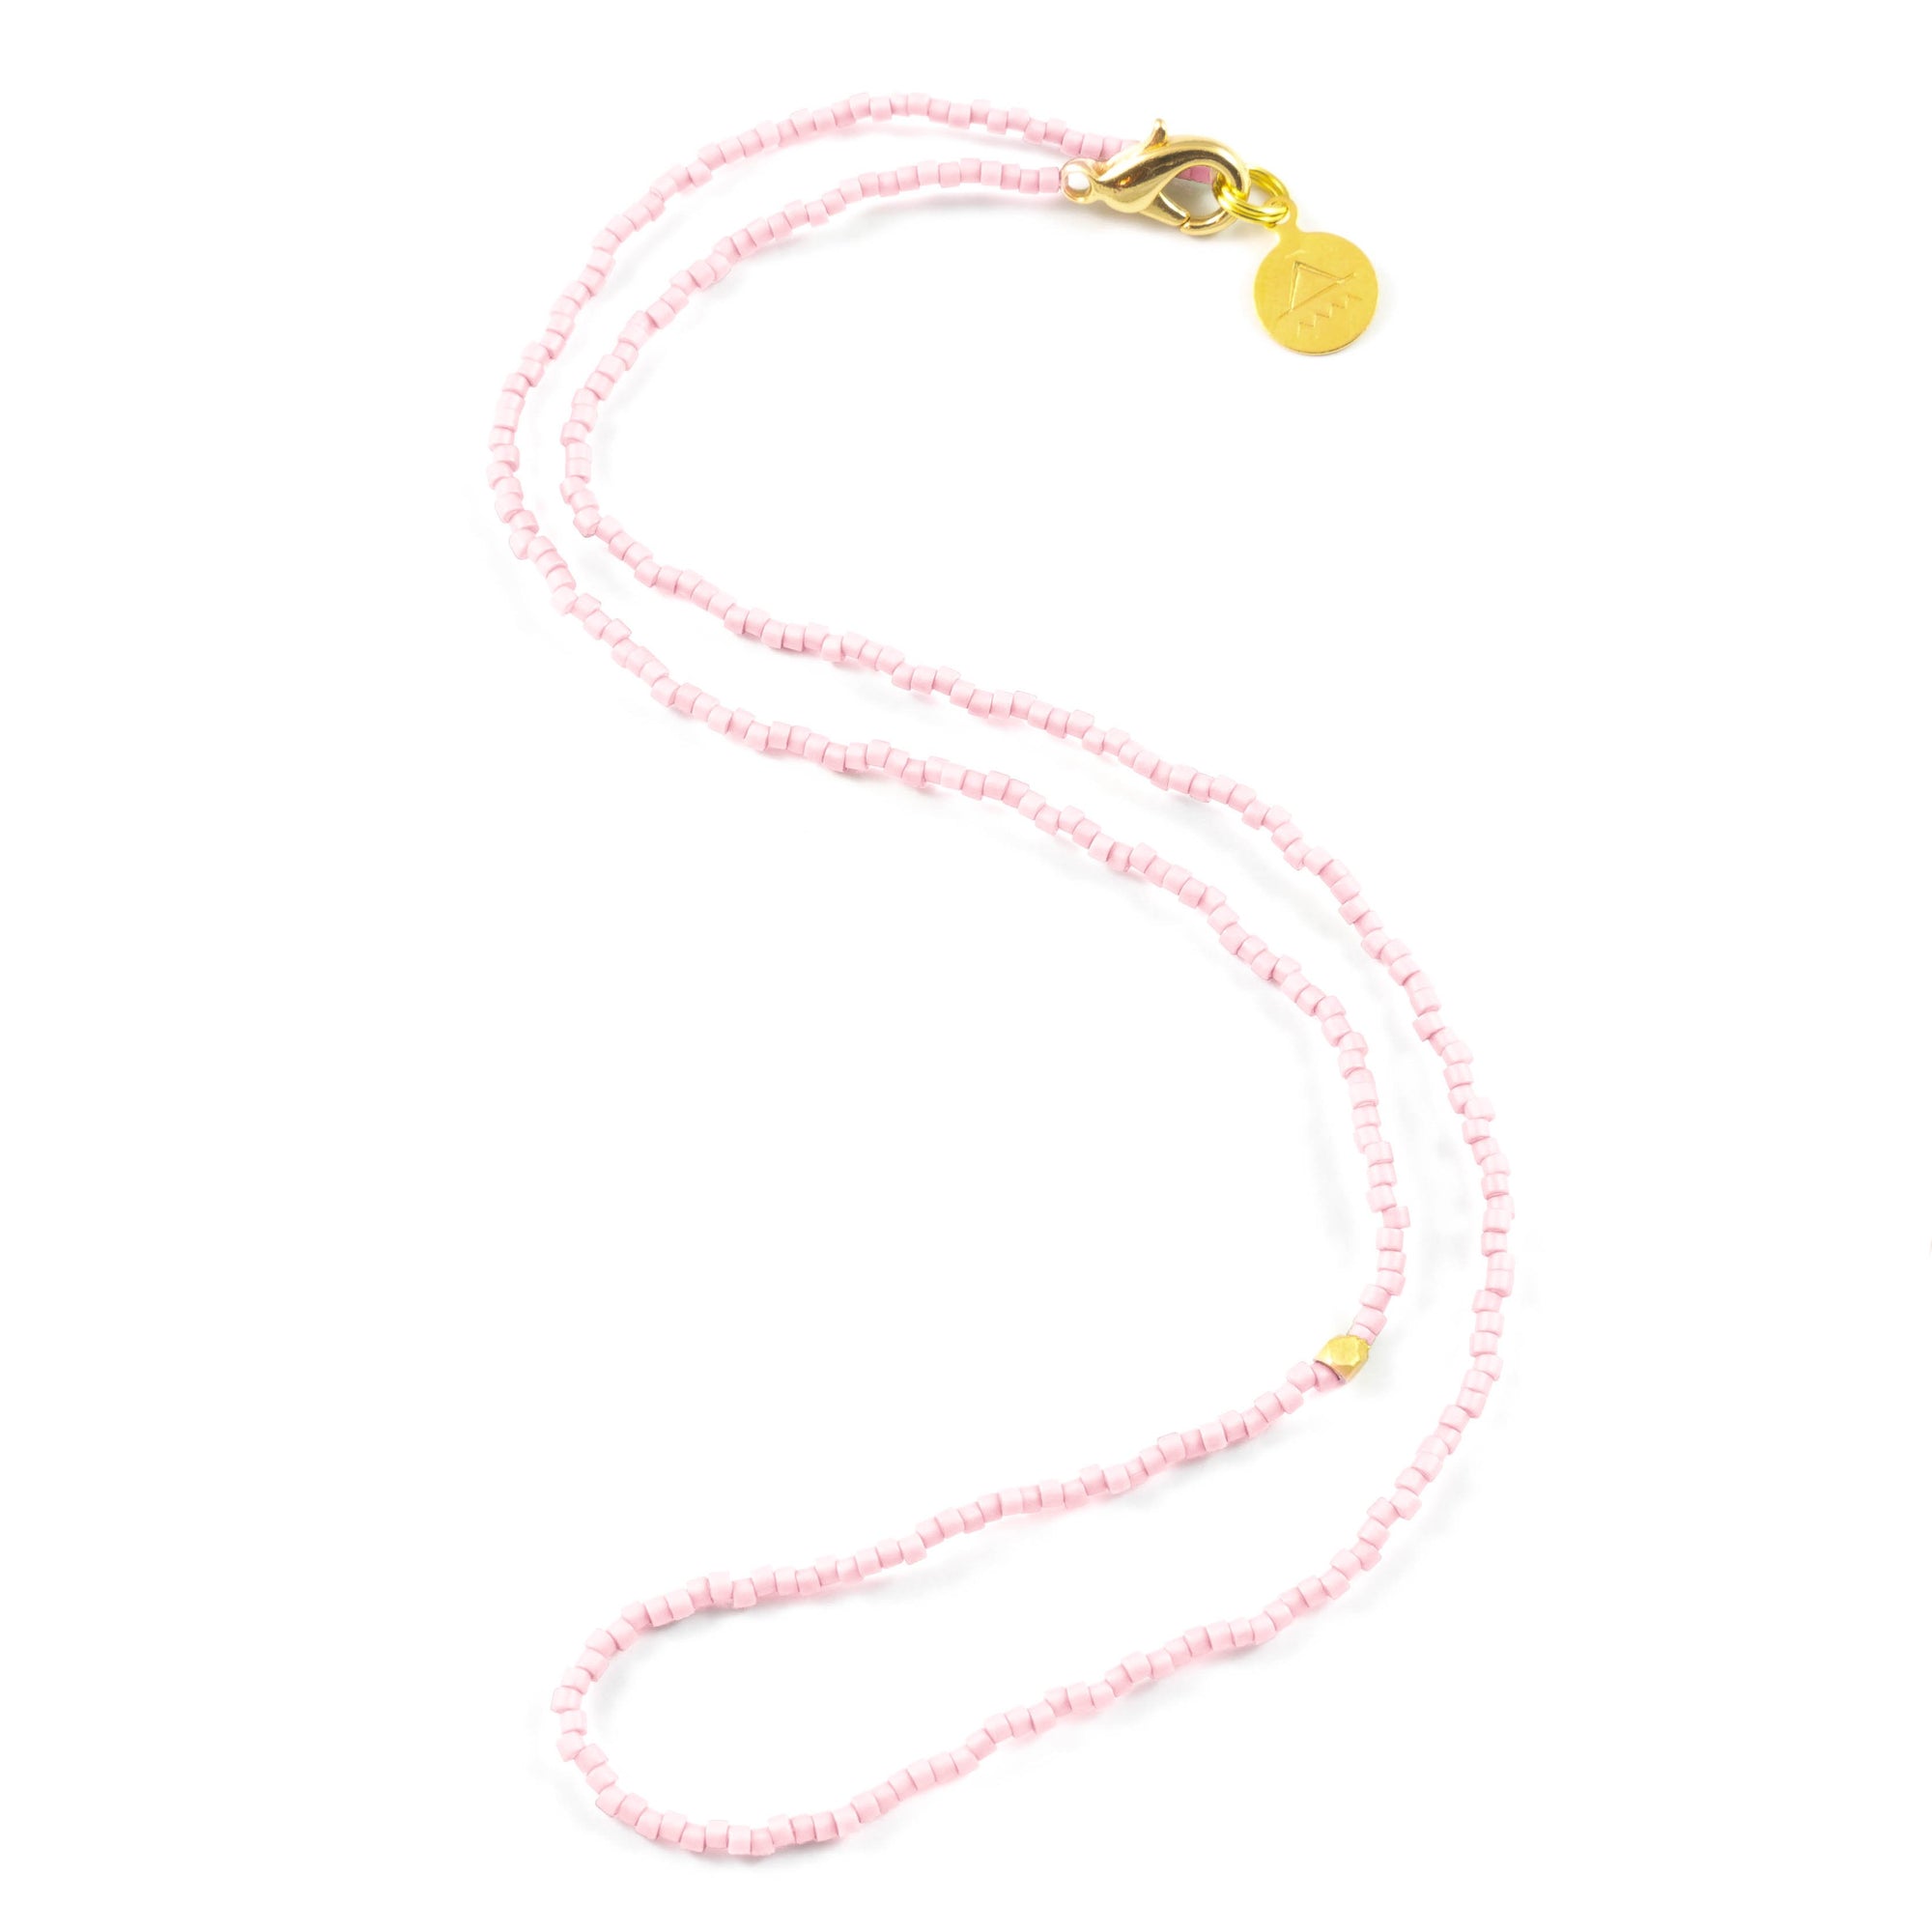 Blush One of a Kind Necklace in Gold